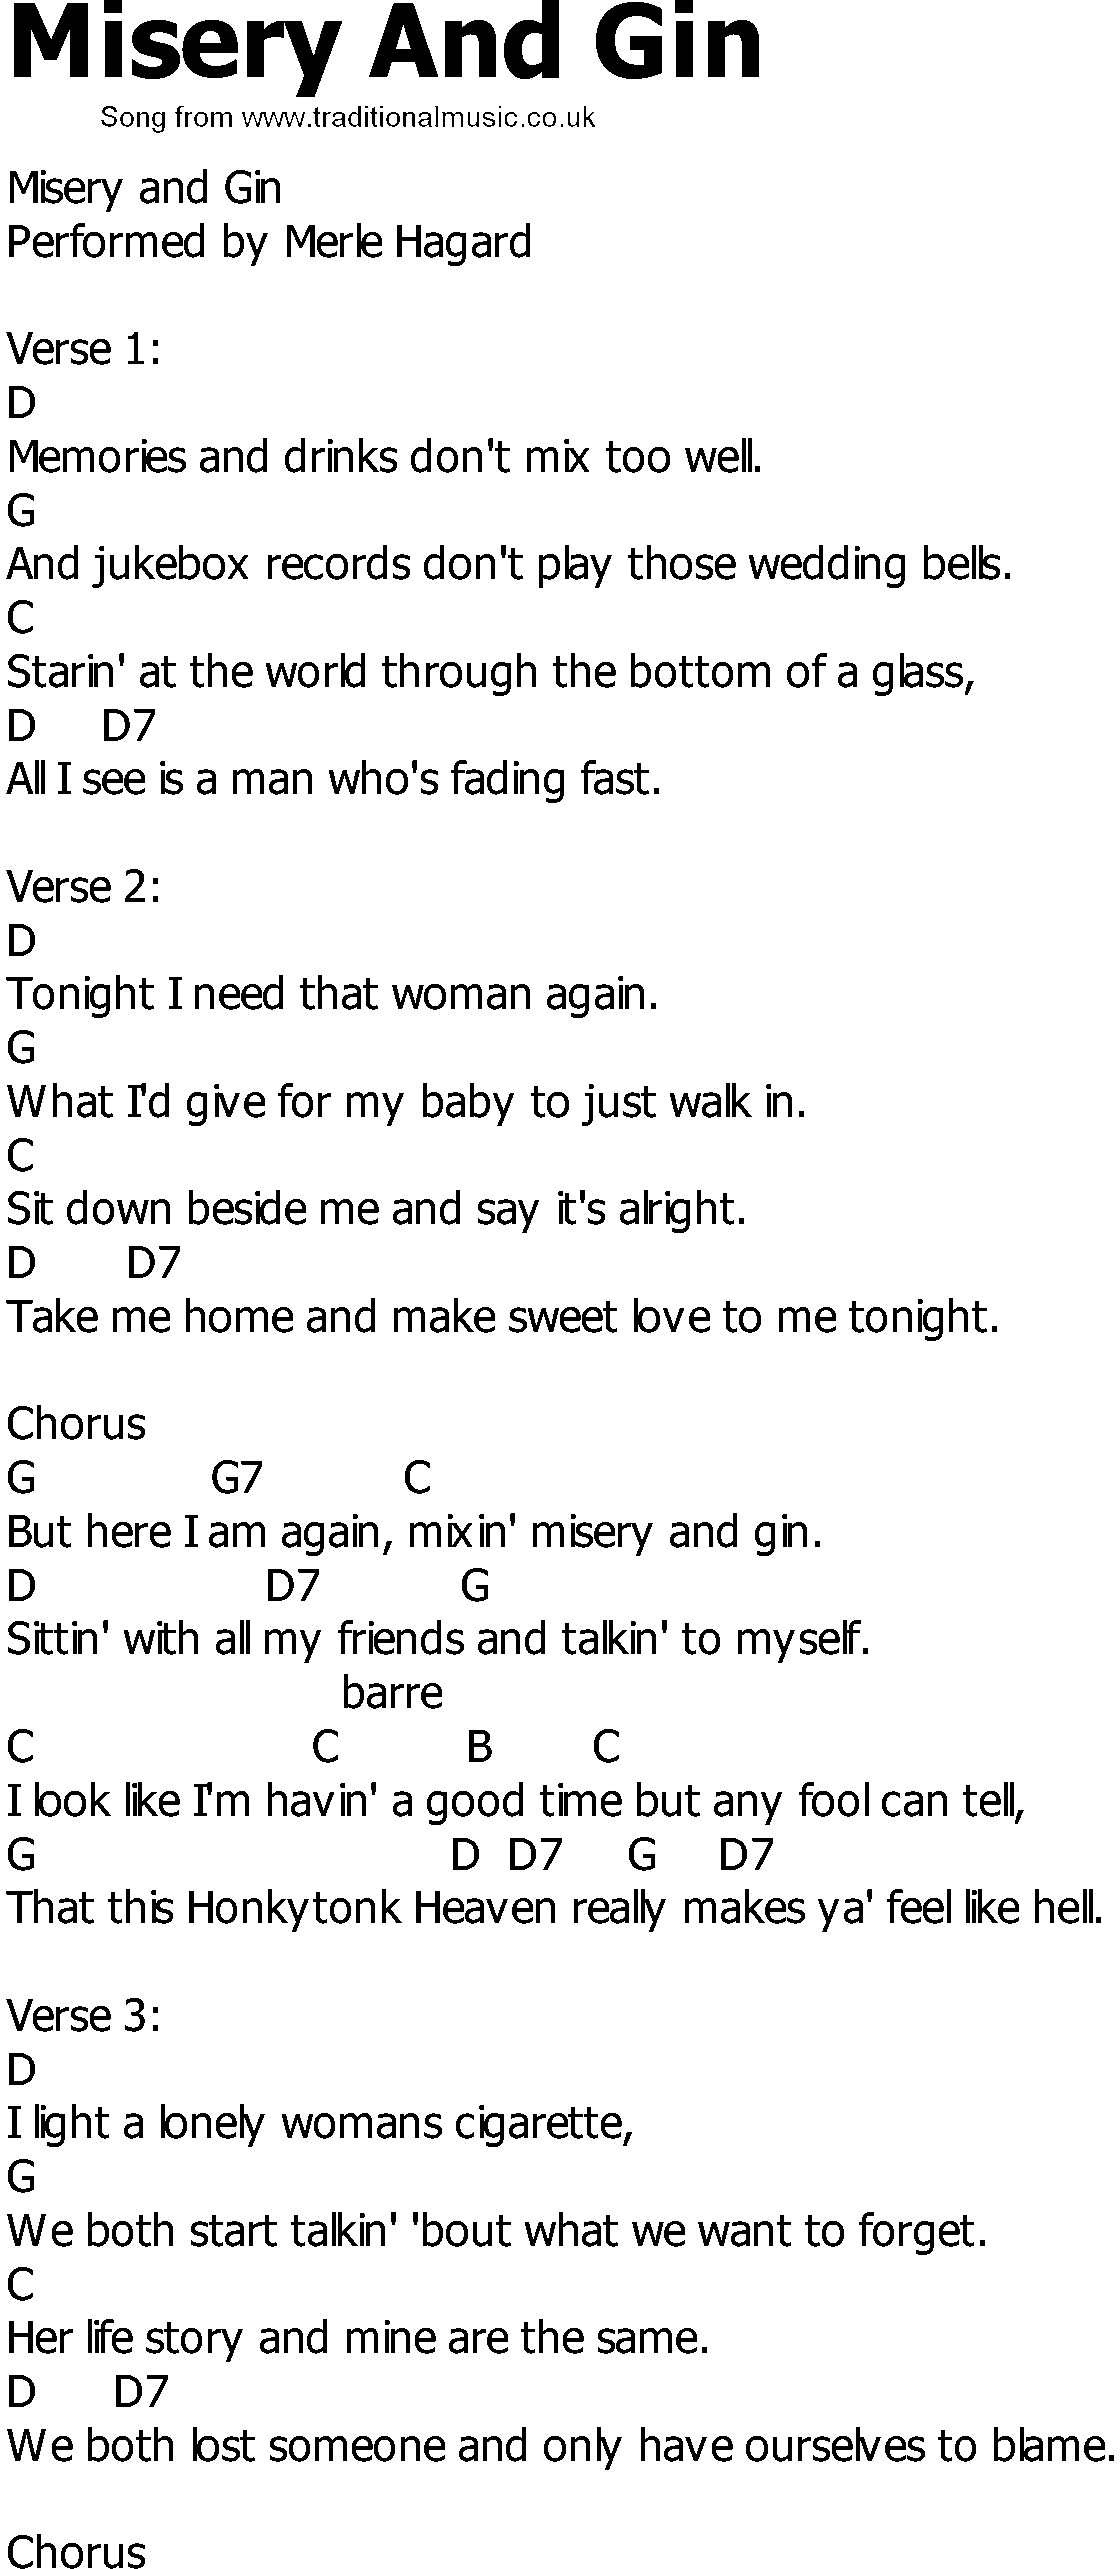 Old Country song lyrics with chords - Misery And Gin